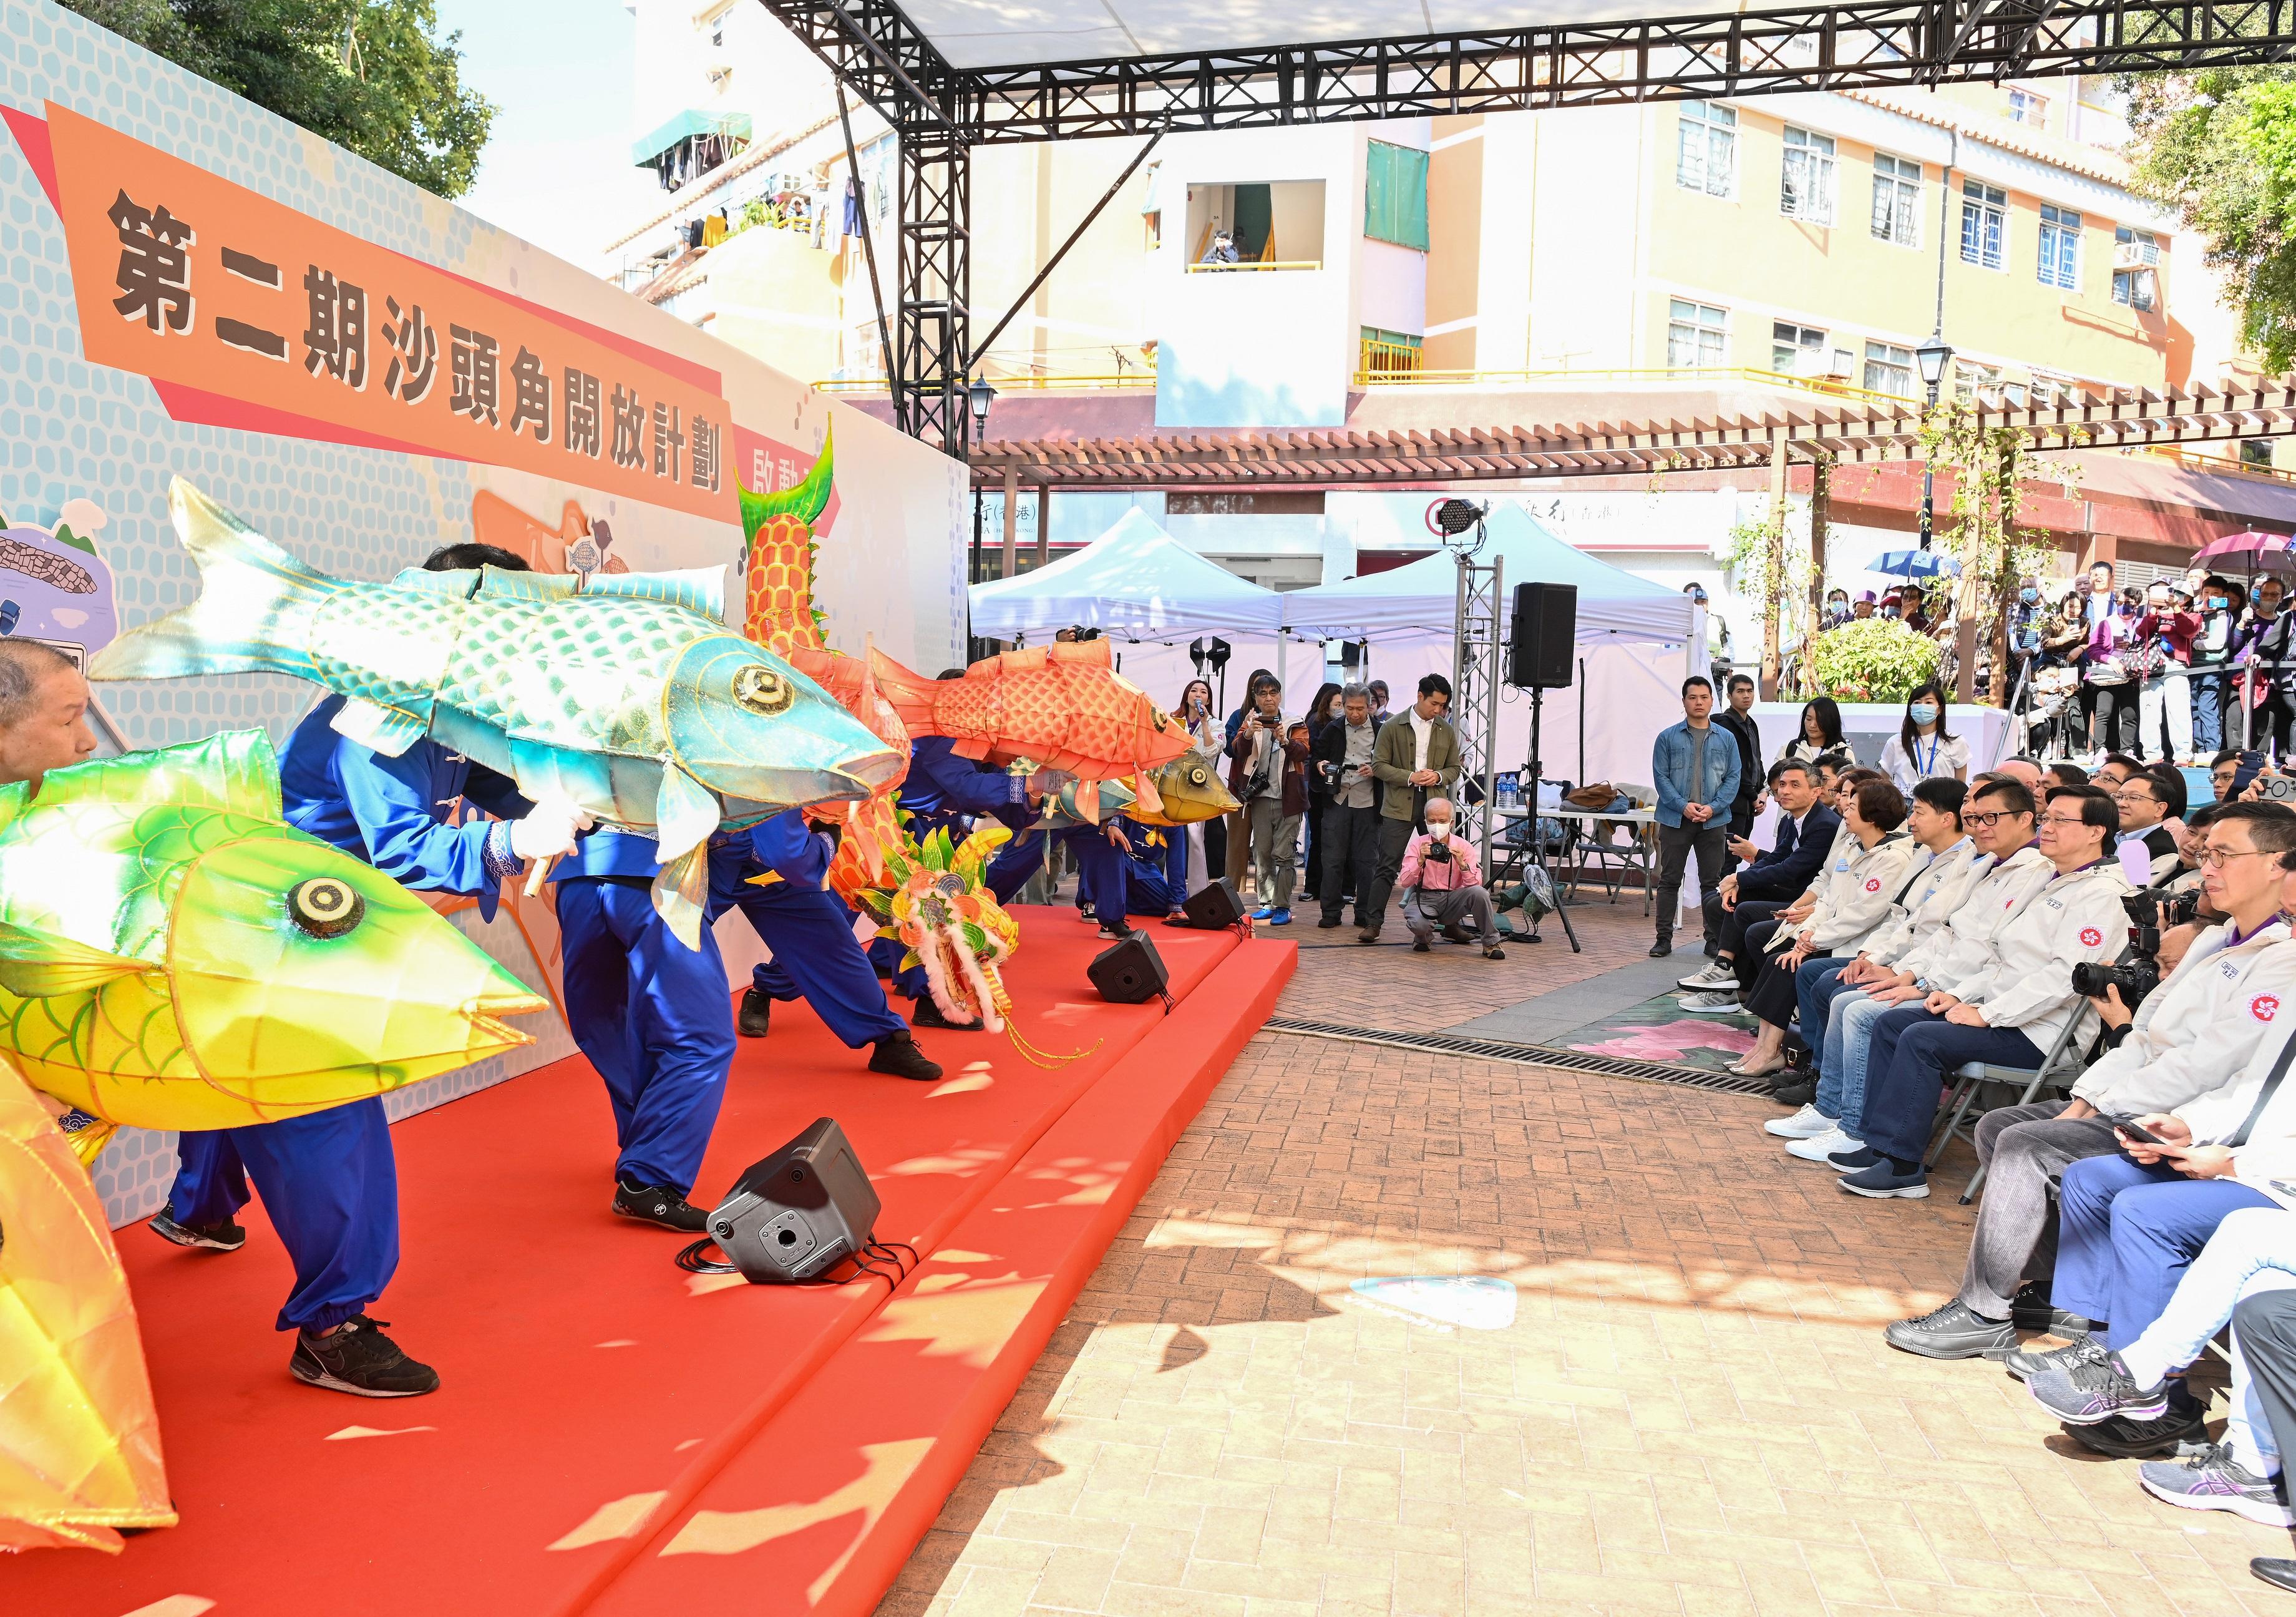 The Chief Executive, Mr John Lee, officiated at the Second Phase Opening-up of Sha Tau Kok Launching Ceremony today (January 6). Photo shows Mr Lee (second right), with other guests, enjoying a "Sha Tau Kok fish-lantern dance" performance.